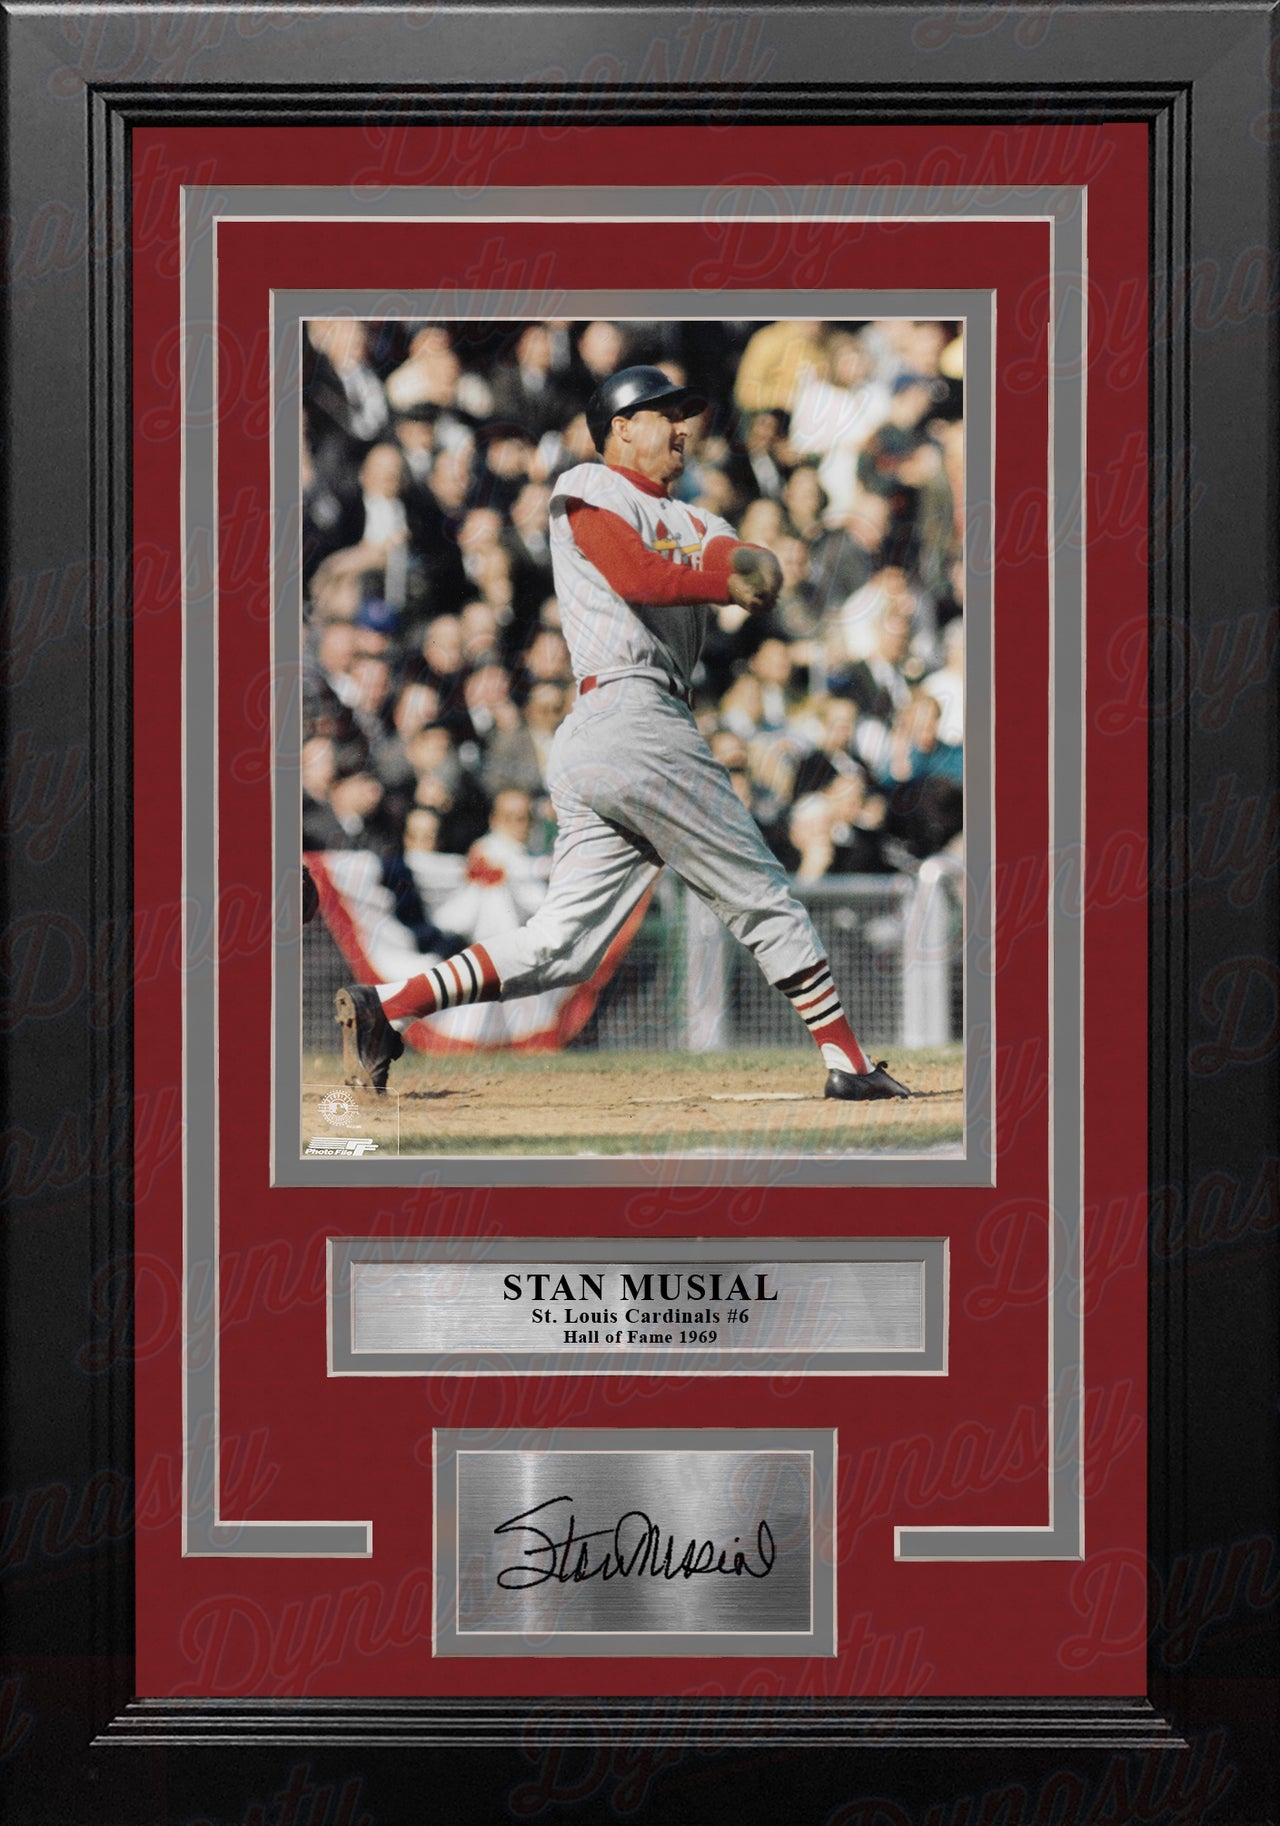 Stan Musial in Action St. Louis Cardinals 8" x 10" Framed Baseball Photo with Engraved Autograph - Dynasty Sports & Framing 